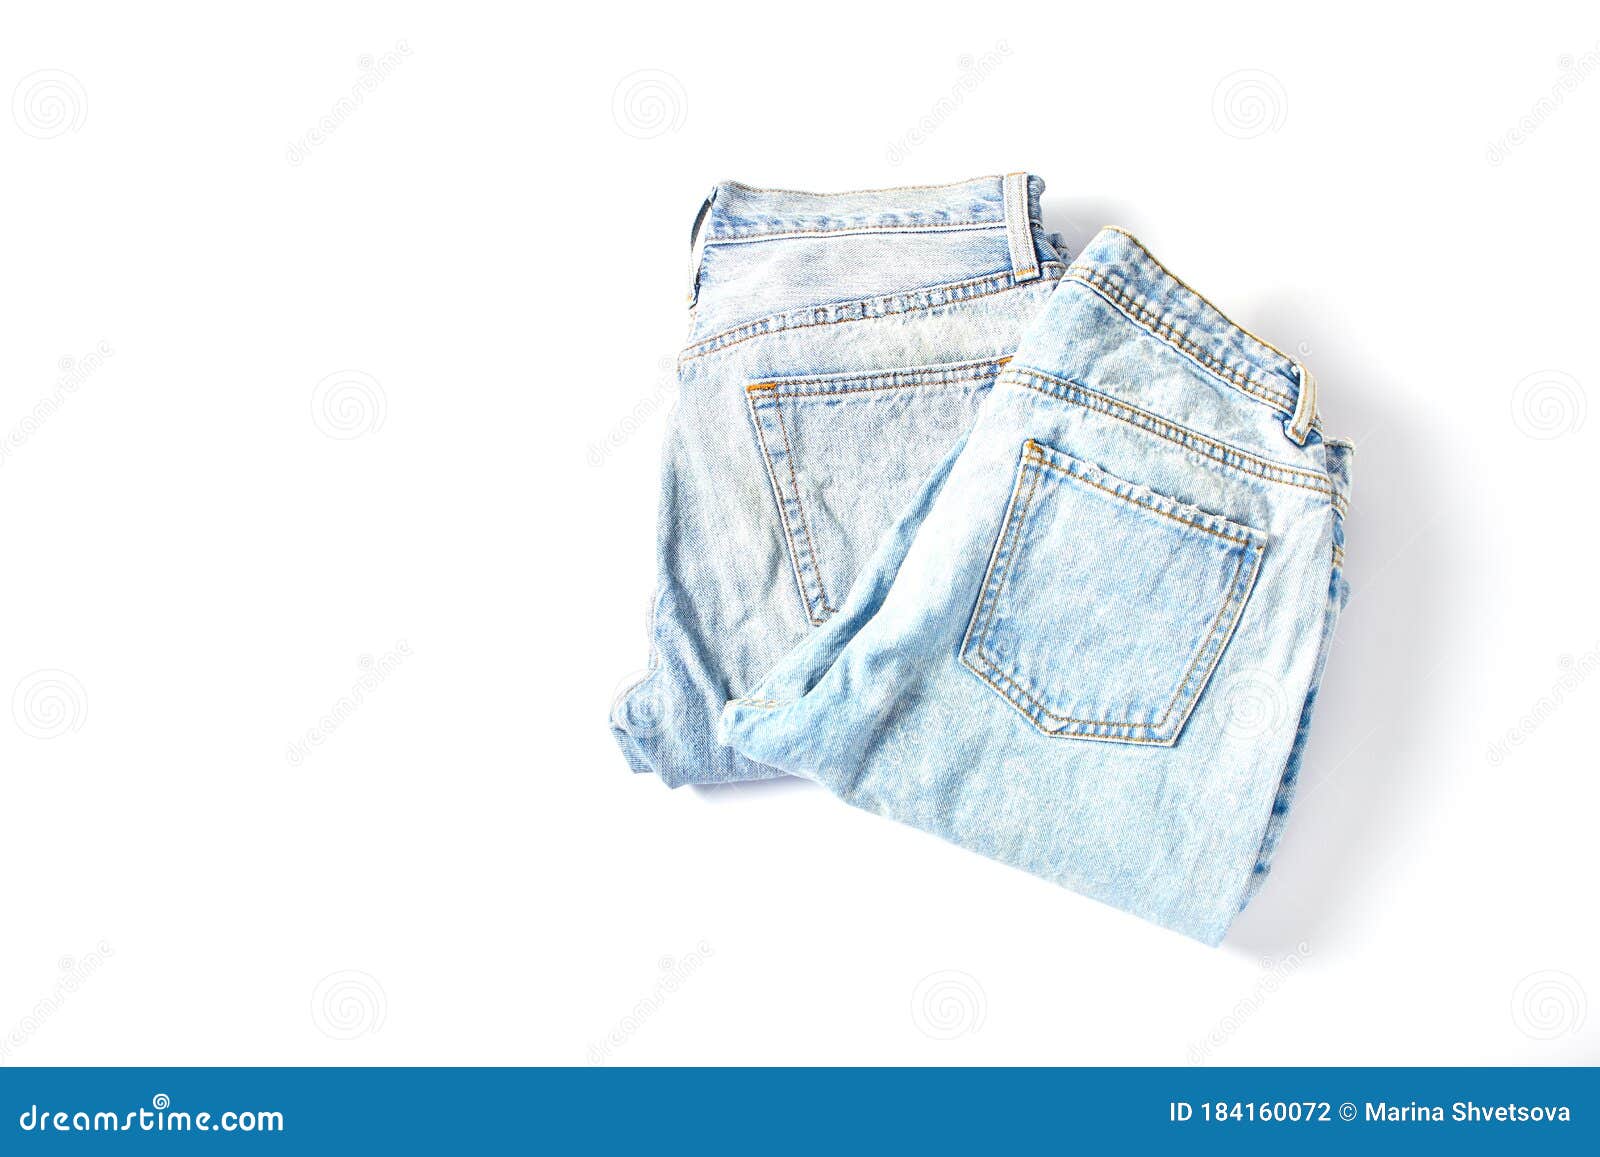 forholdet Tilkalde afkom Online Shopping Concept. a Set of Two Pairs of Jeans Trousers on a White  Background Stock Photo - Image of cloth, jeans: 184160072